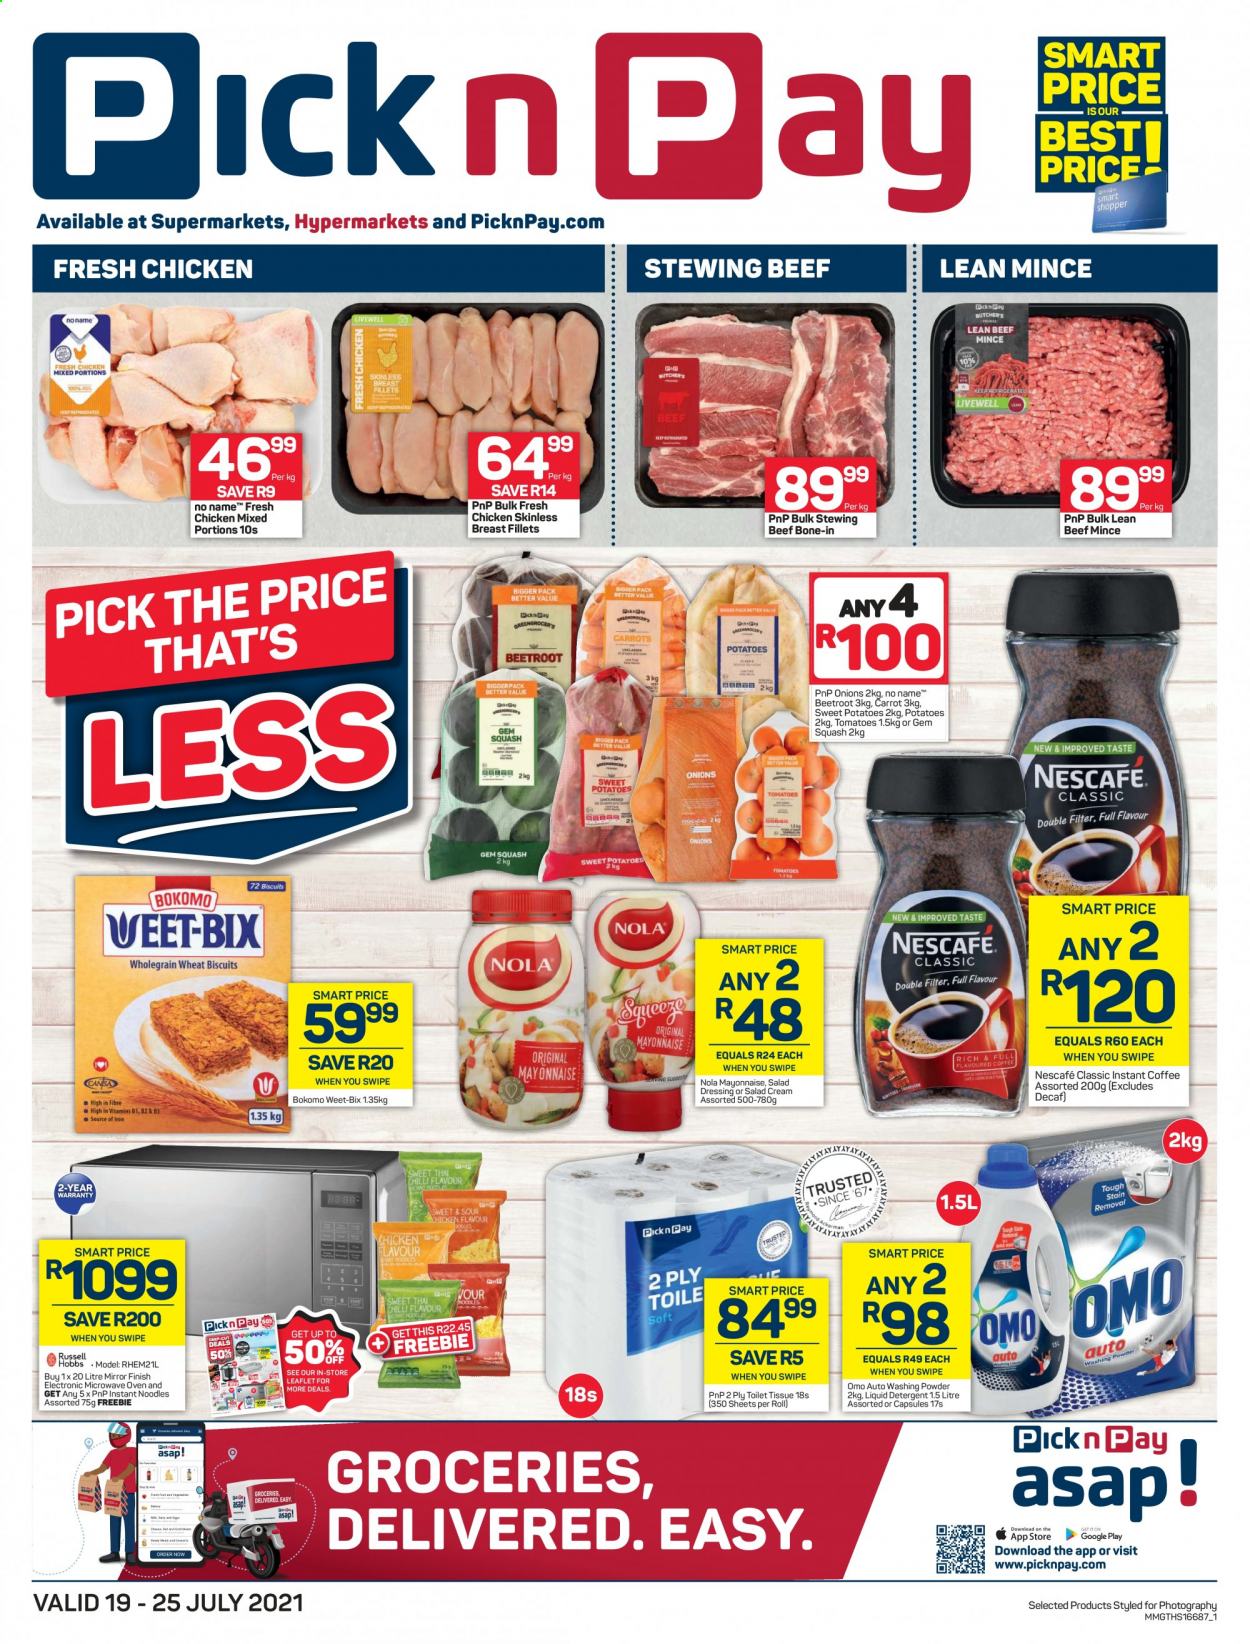 Pick n Pay specials - 07.19.2021 - 07.25.2021. 